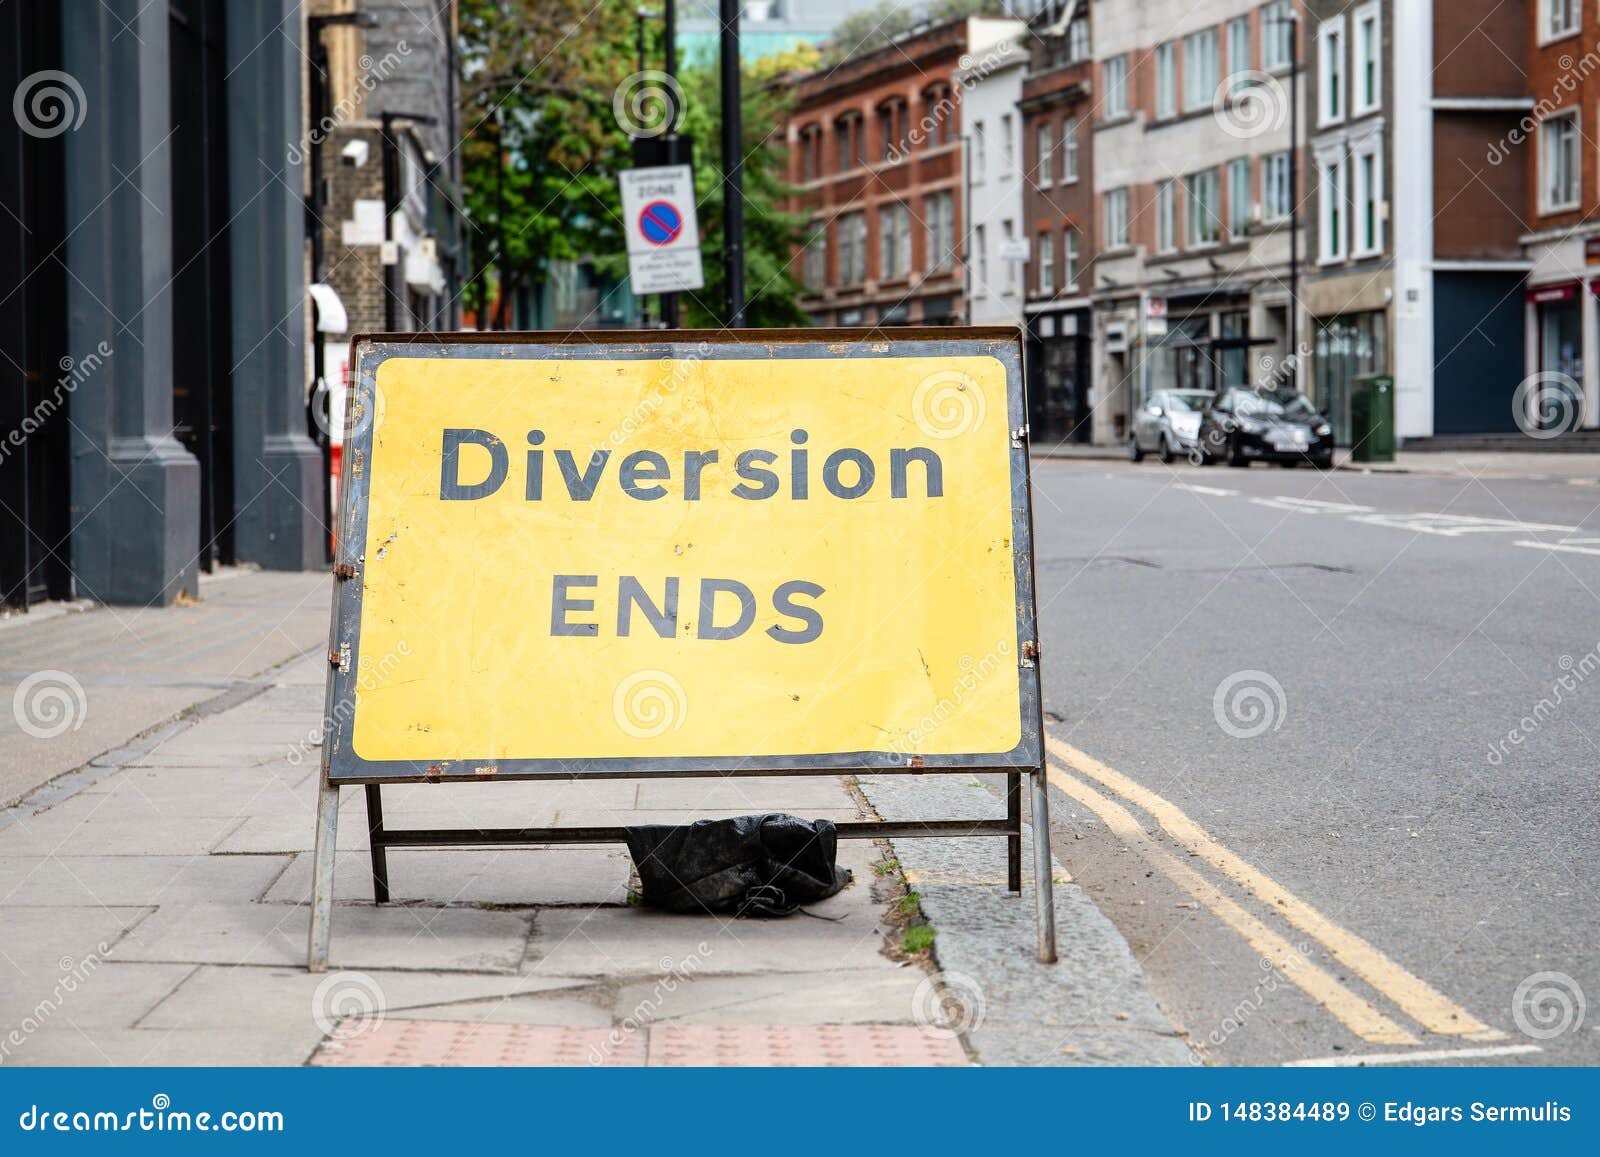 yellow diversion ends road sign in a uk city street